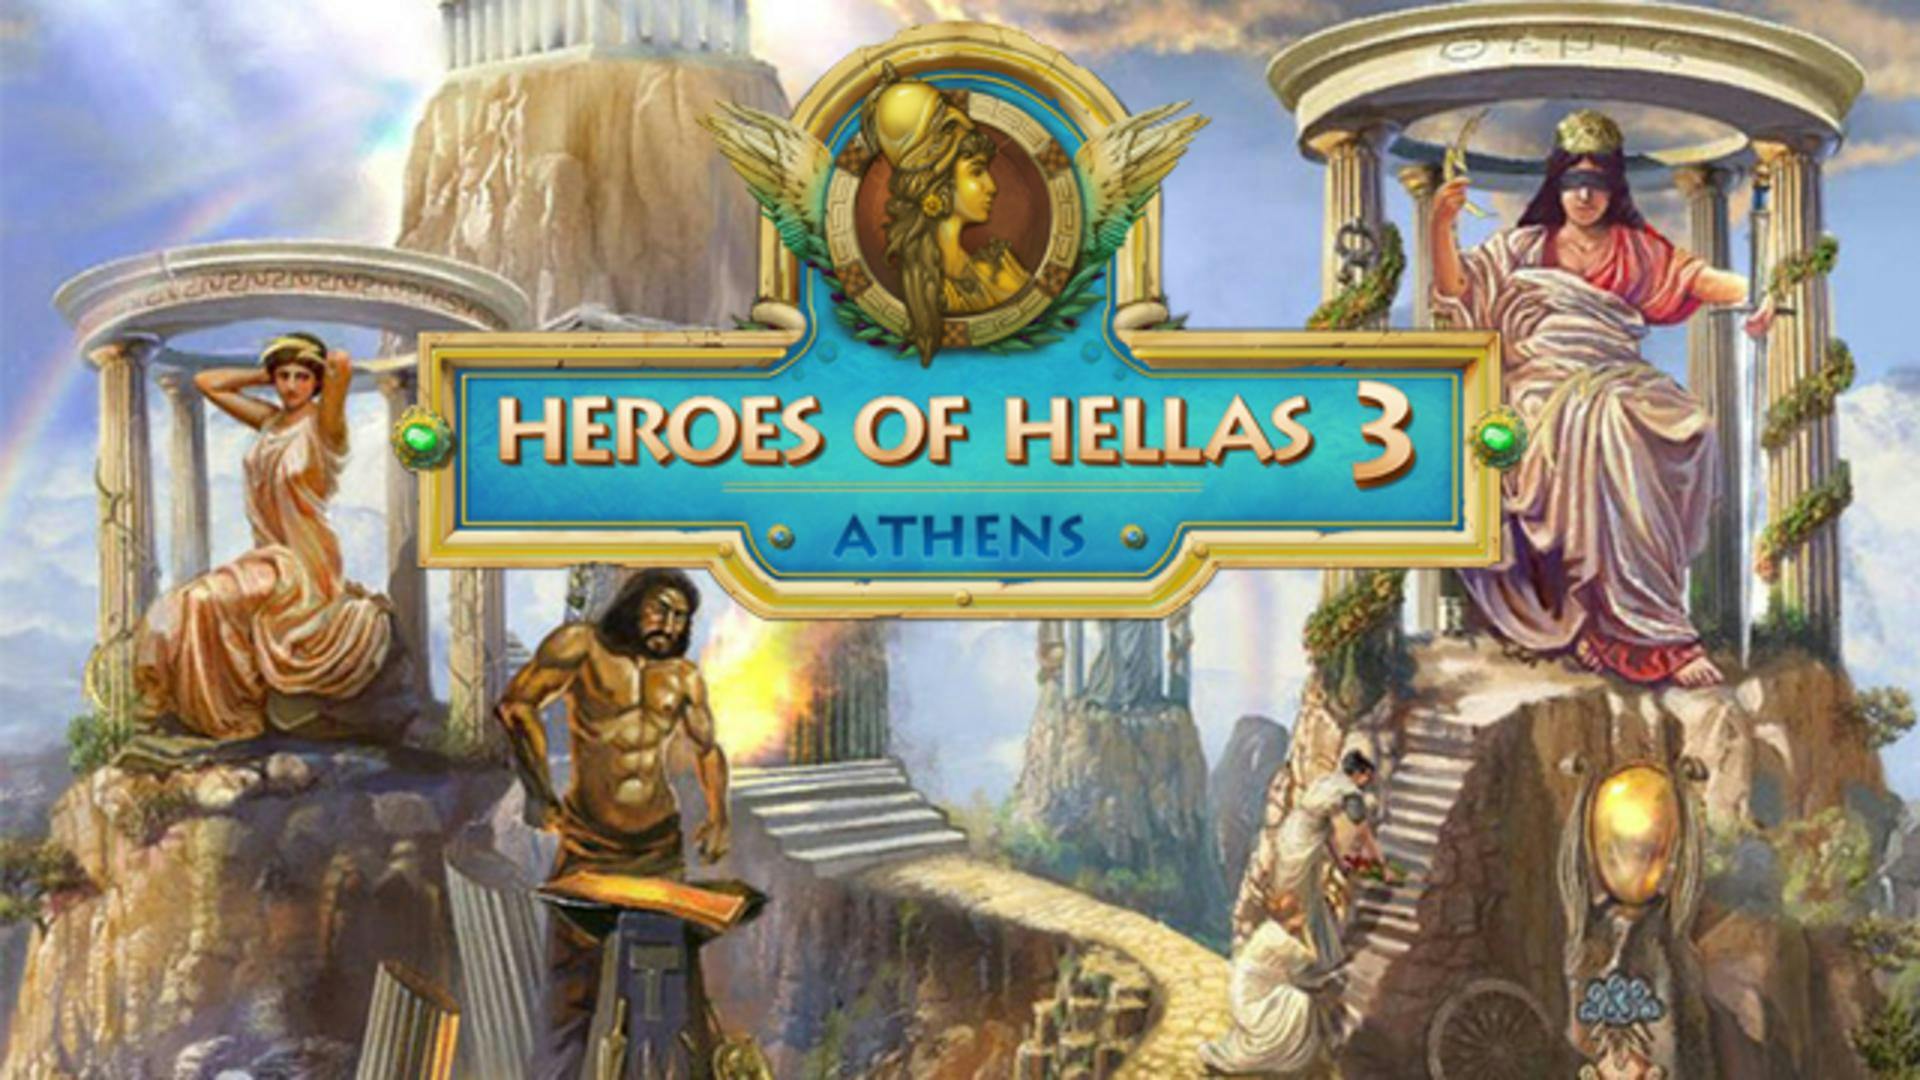 heroes-of-hellas-3-athens-pc-mac-steam-game-fanatical